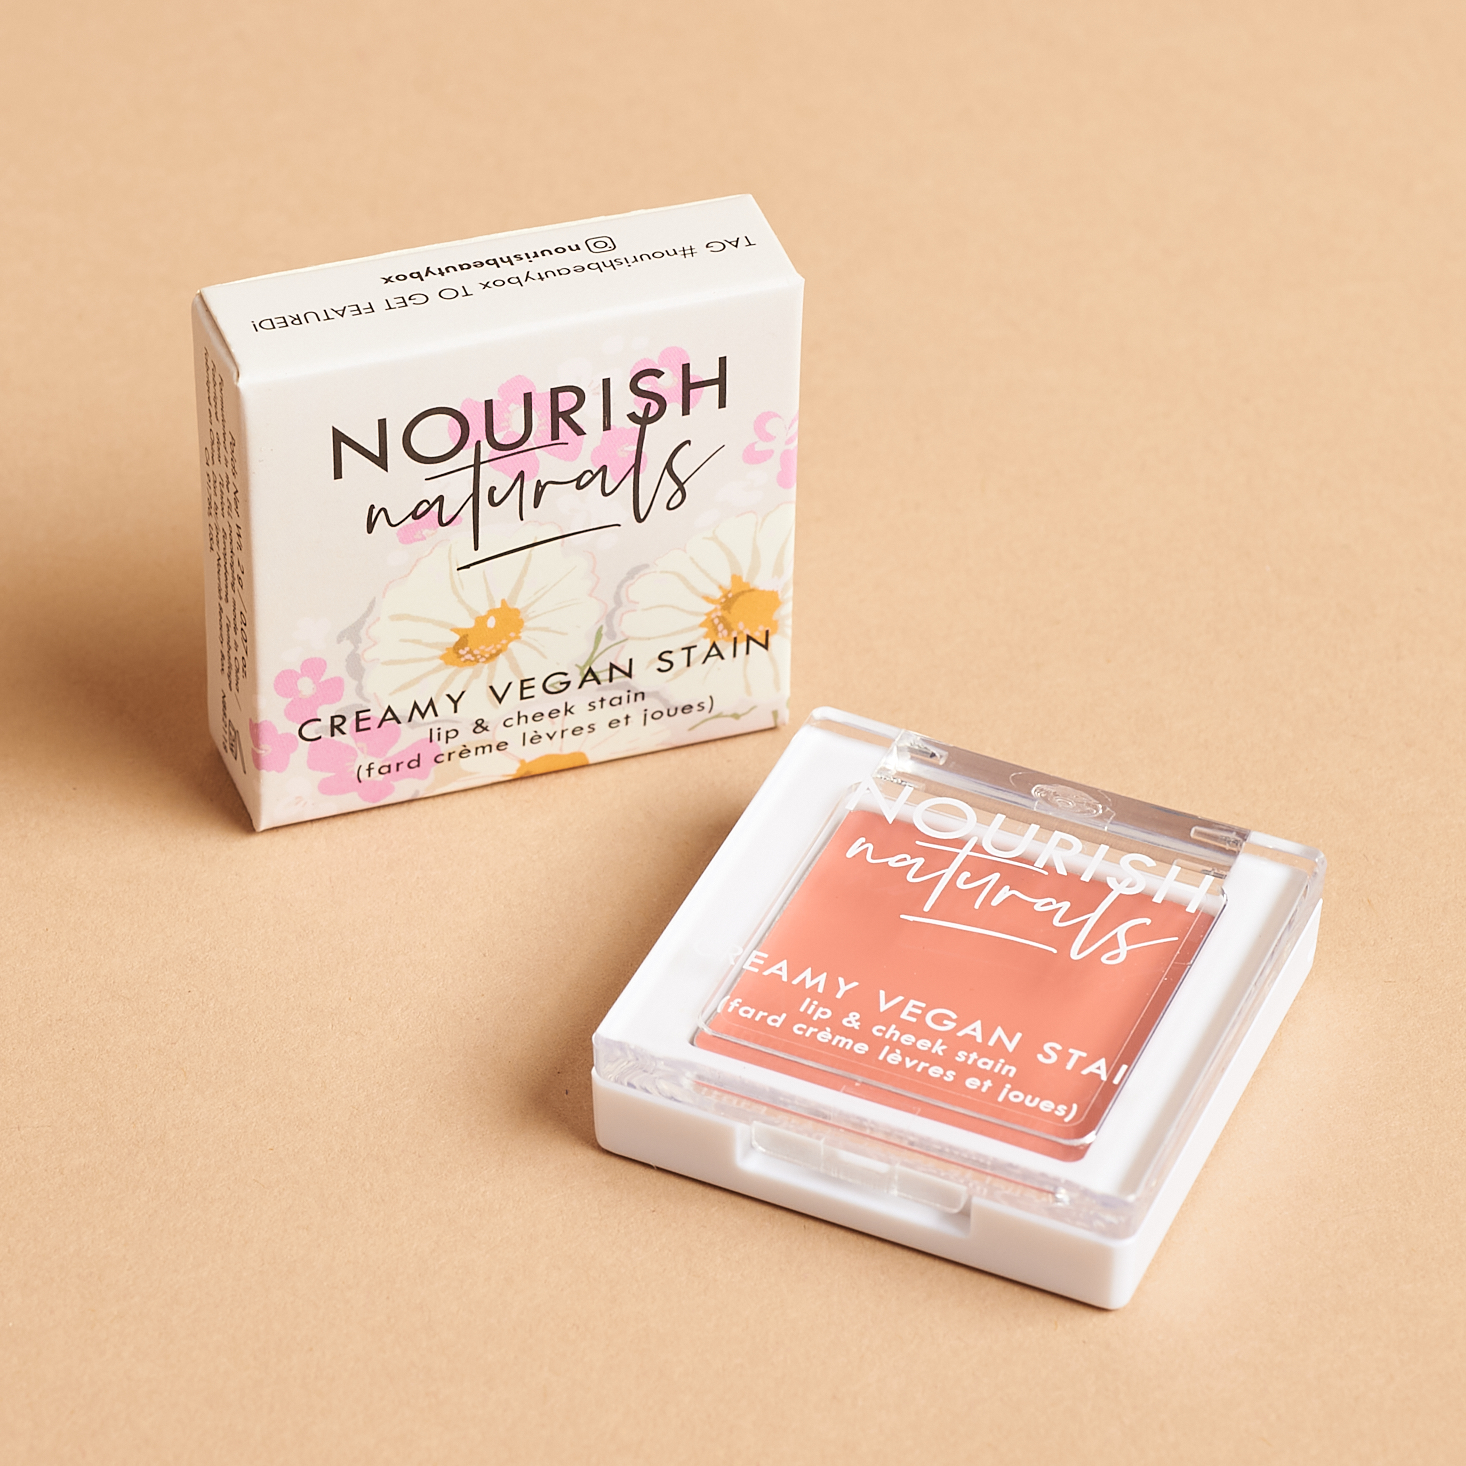 Box Front of Nourish Naturals Creamy Vegan Stain in Apricot for Nourish Beauty Box October 2021